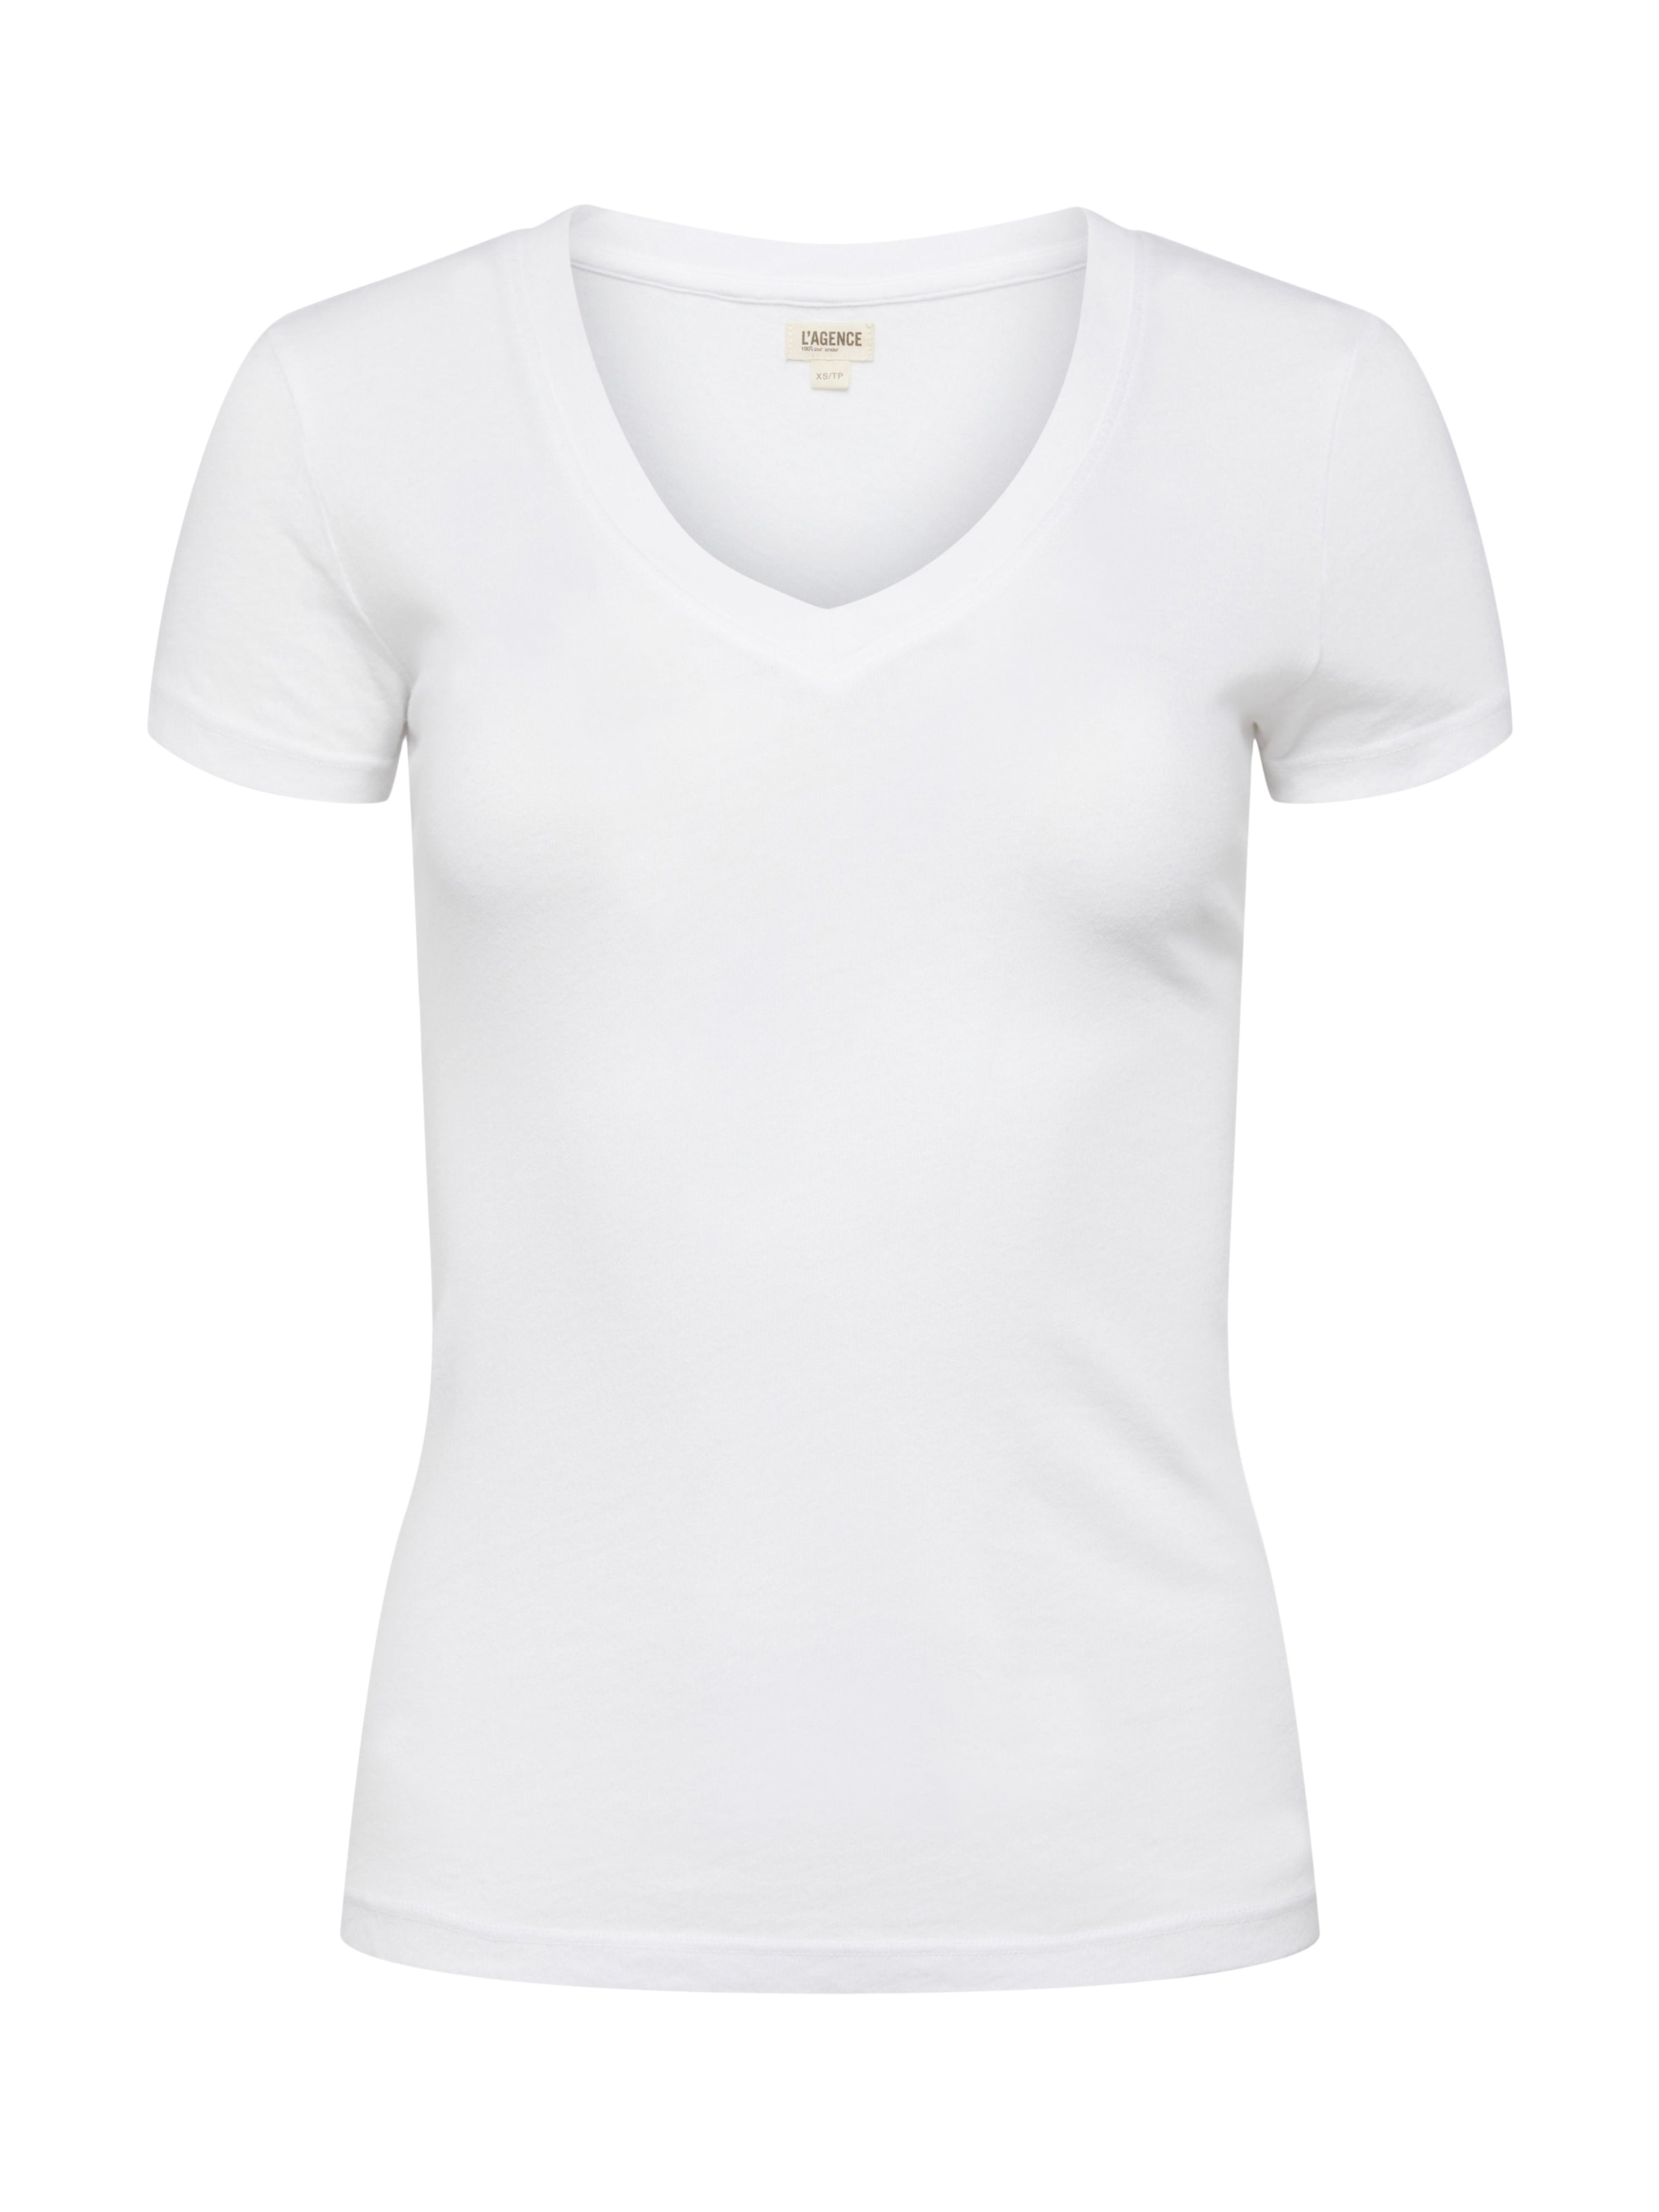 Becca Tee in White - L'AGENCE